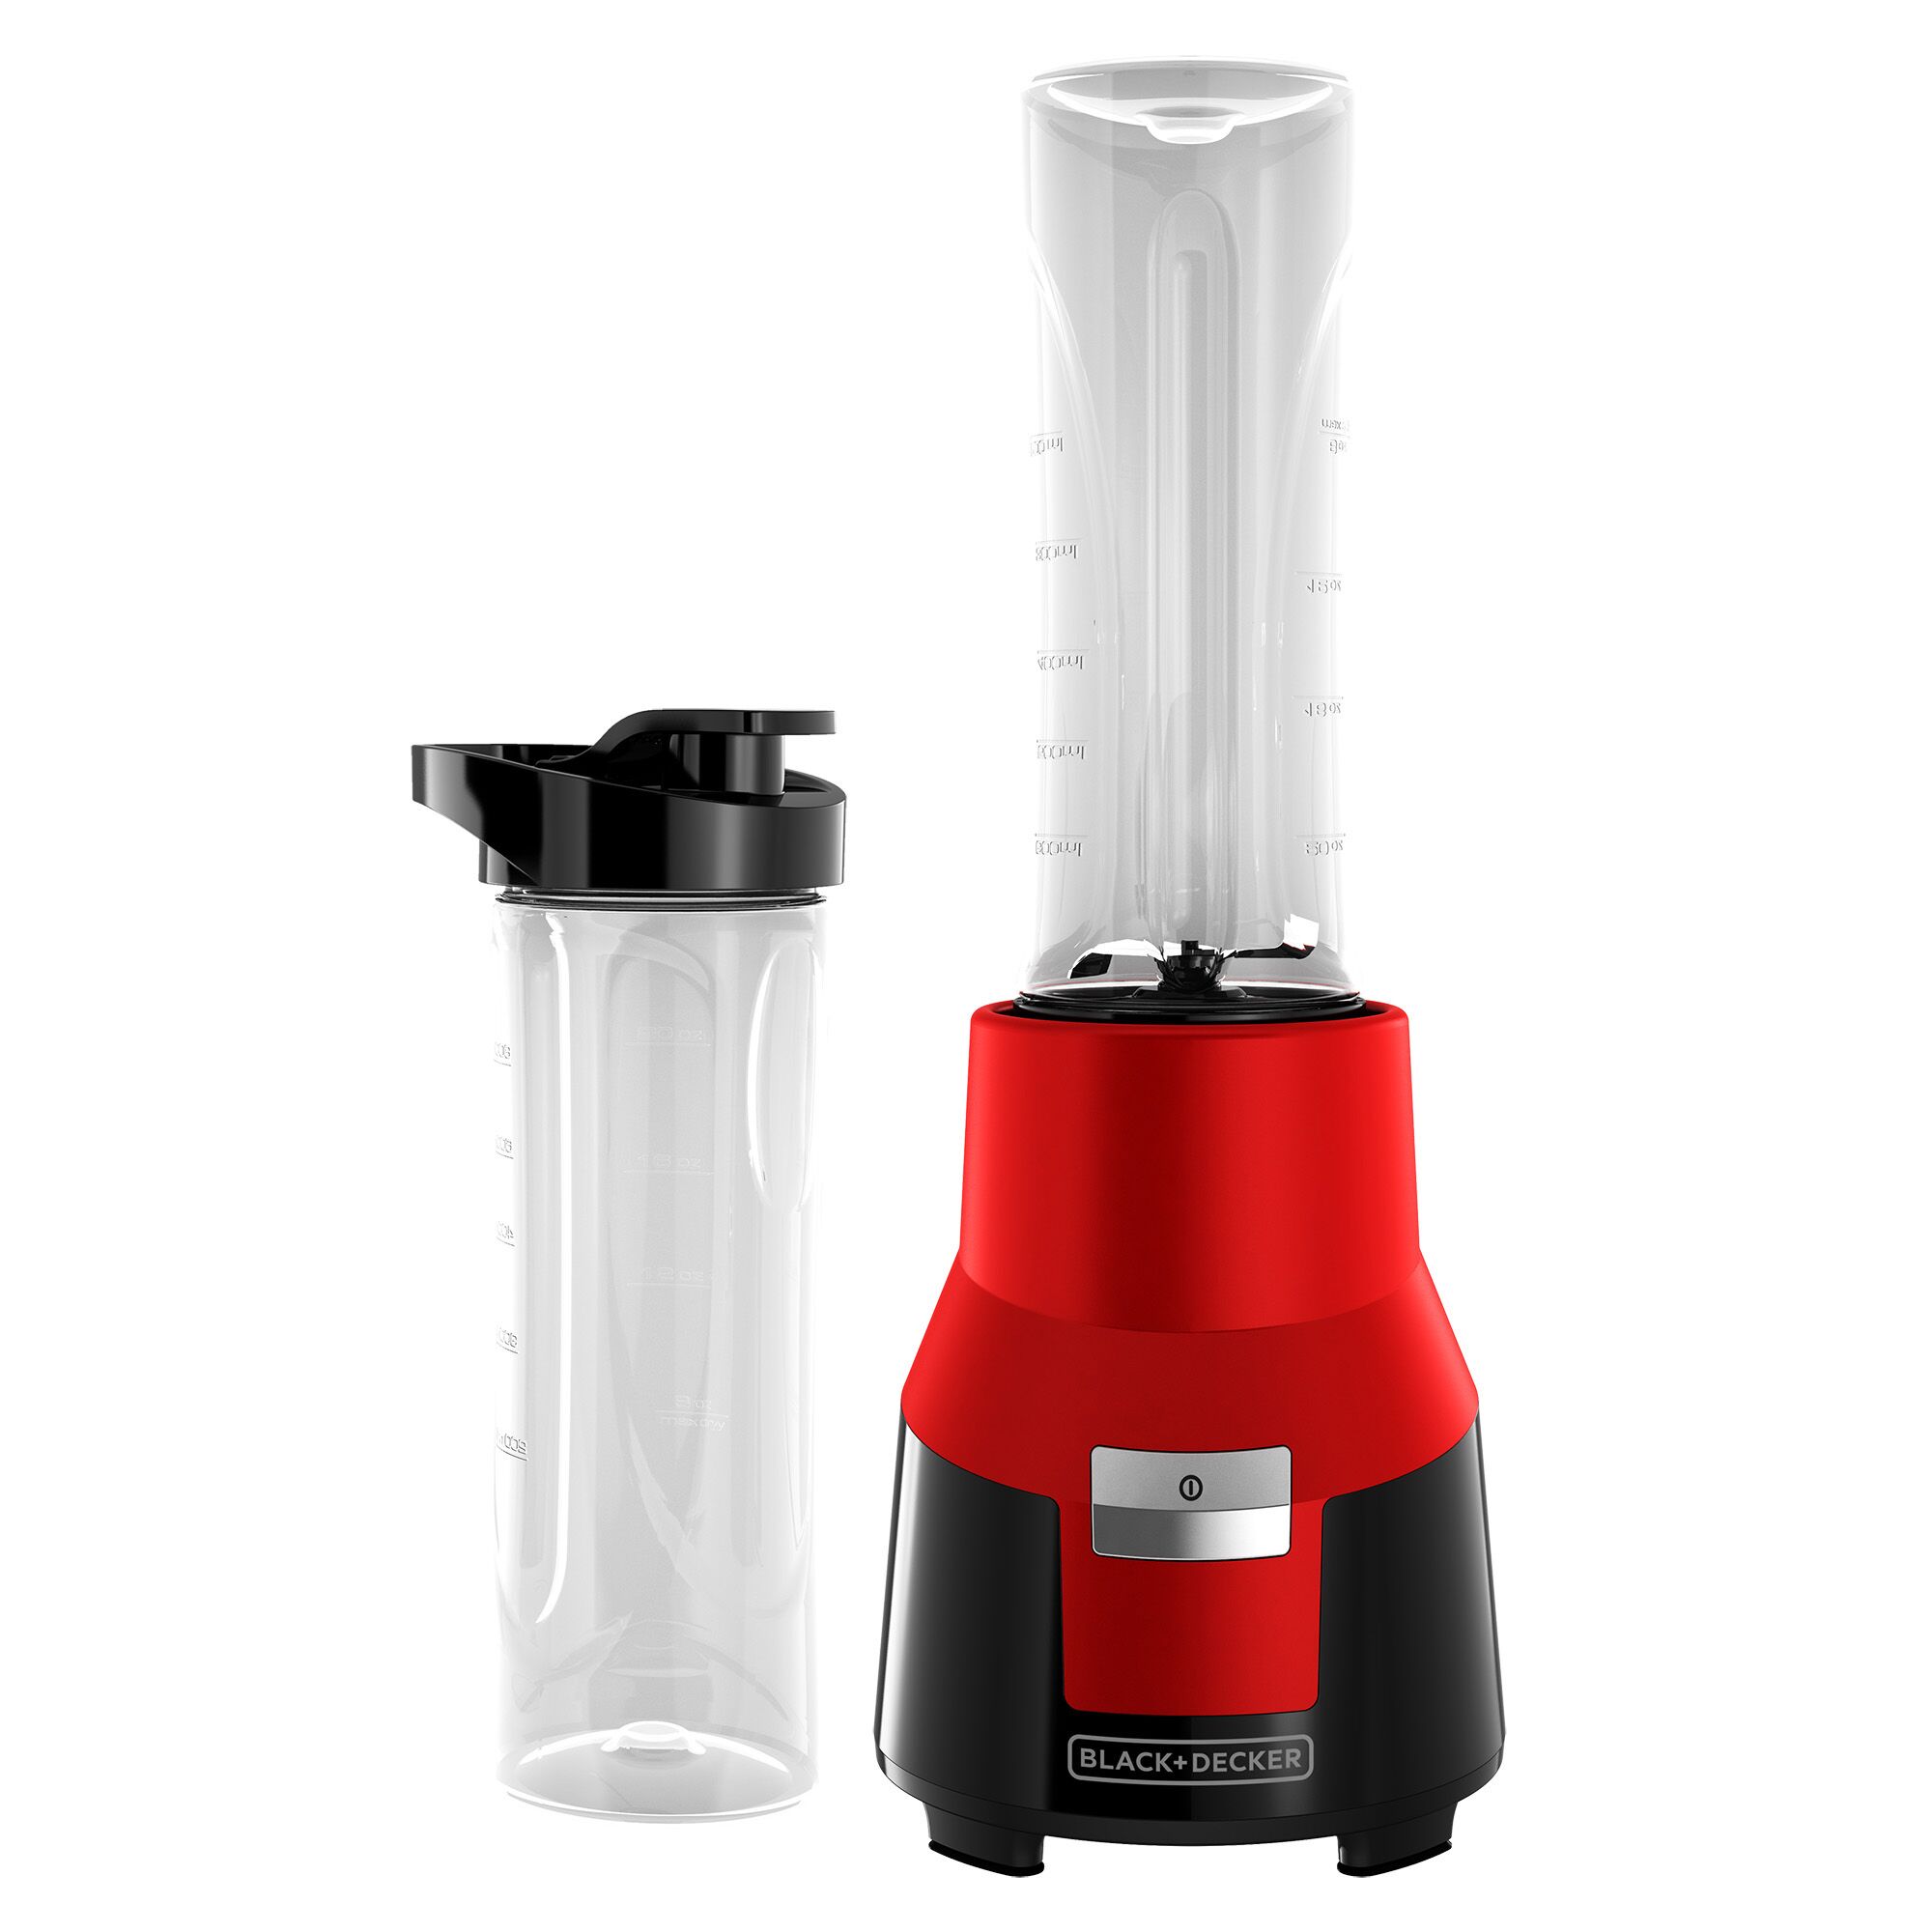 FusionBlade Personal Blender with plastic jar.